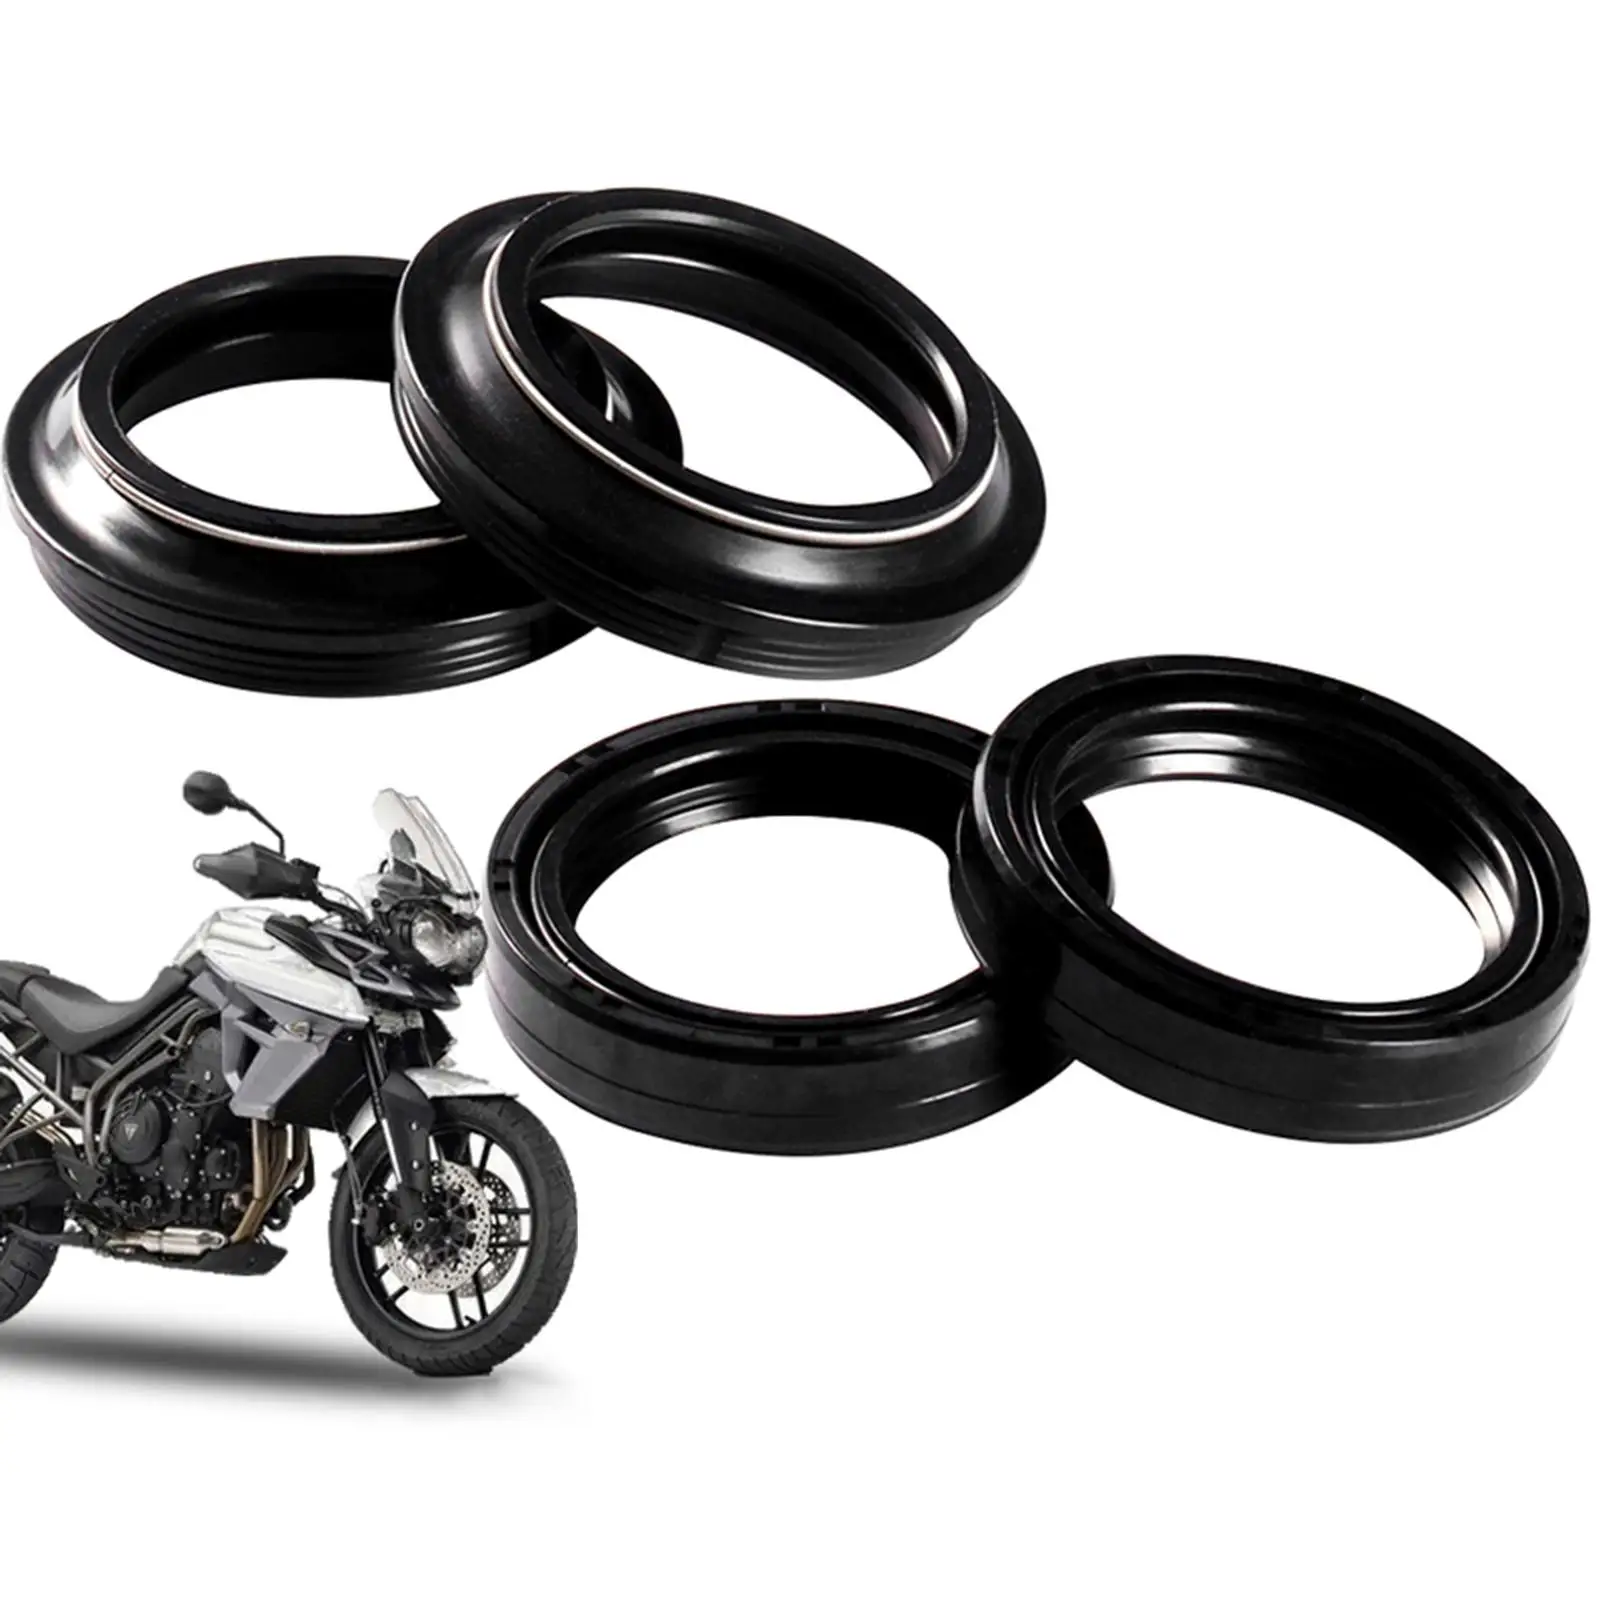 Front Fork Damper Oil Seal and Dust Seal Kit 43x54x11mm Durable Direct Replacements for Honda CBR600 Automotive Accessories